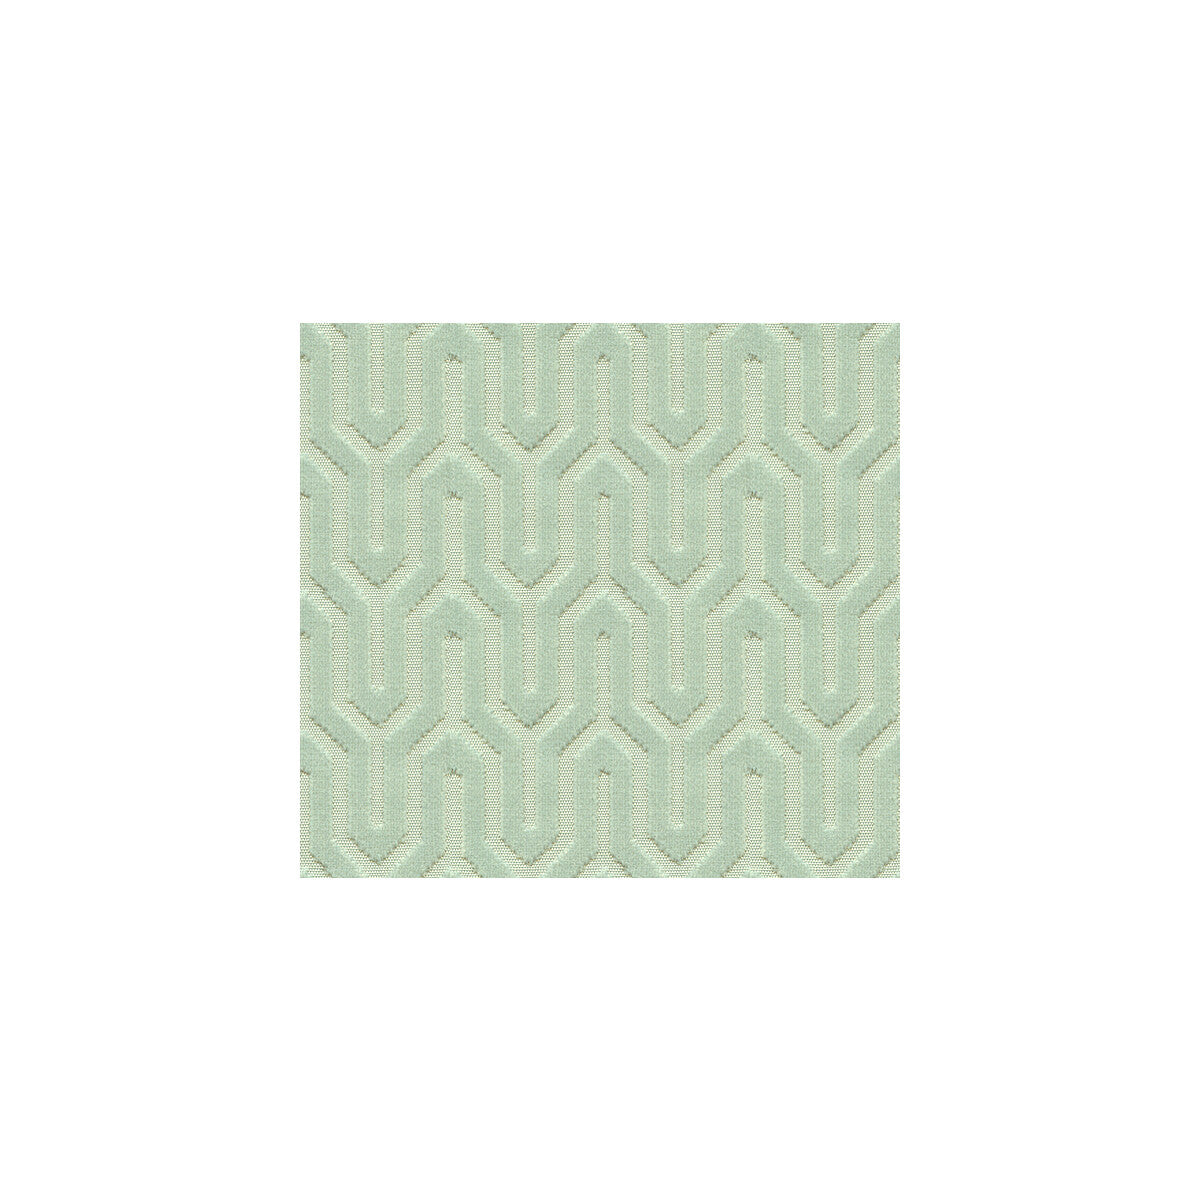 Meachem fabric in spa color - pattern 32797.3.0 - by Kravet Basics in the Thom Filicia collection